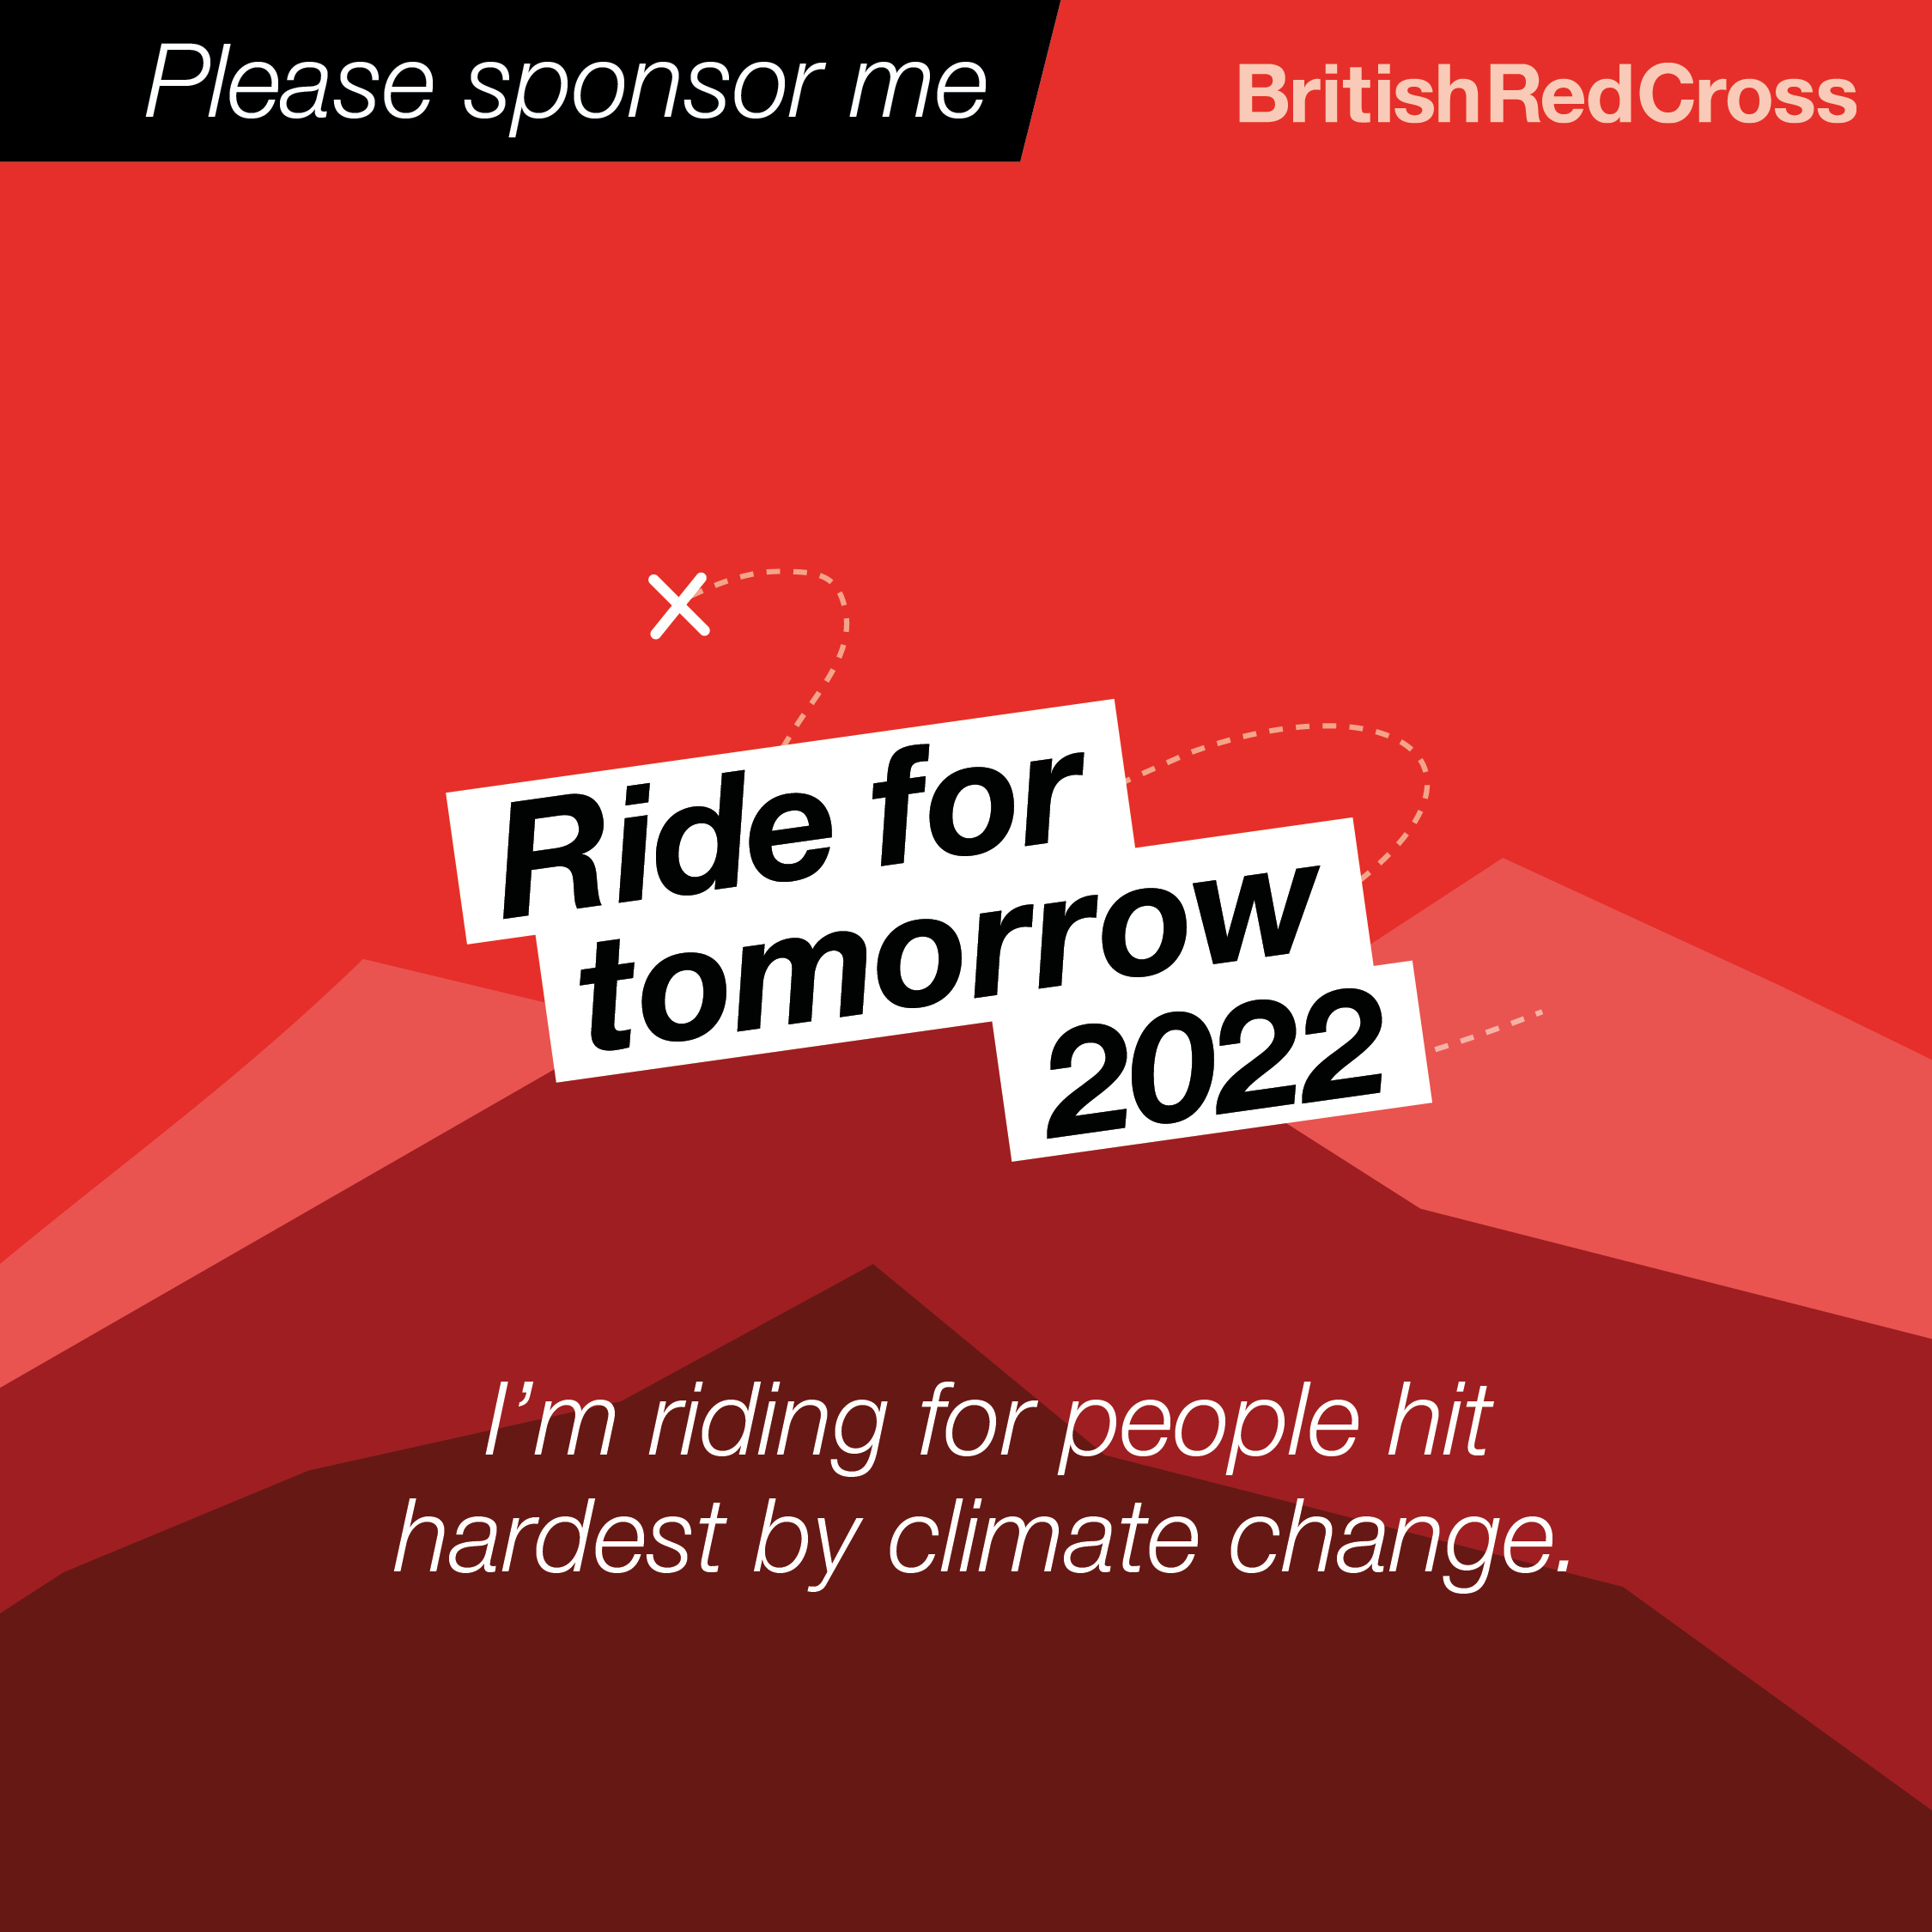 Please sponsor me I'm riding for people hit hardest by climate change text on a red background with 3 mountain outlines